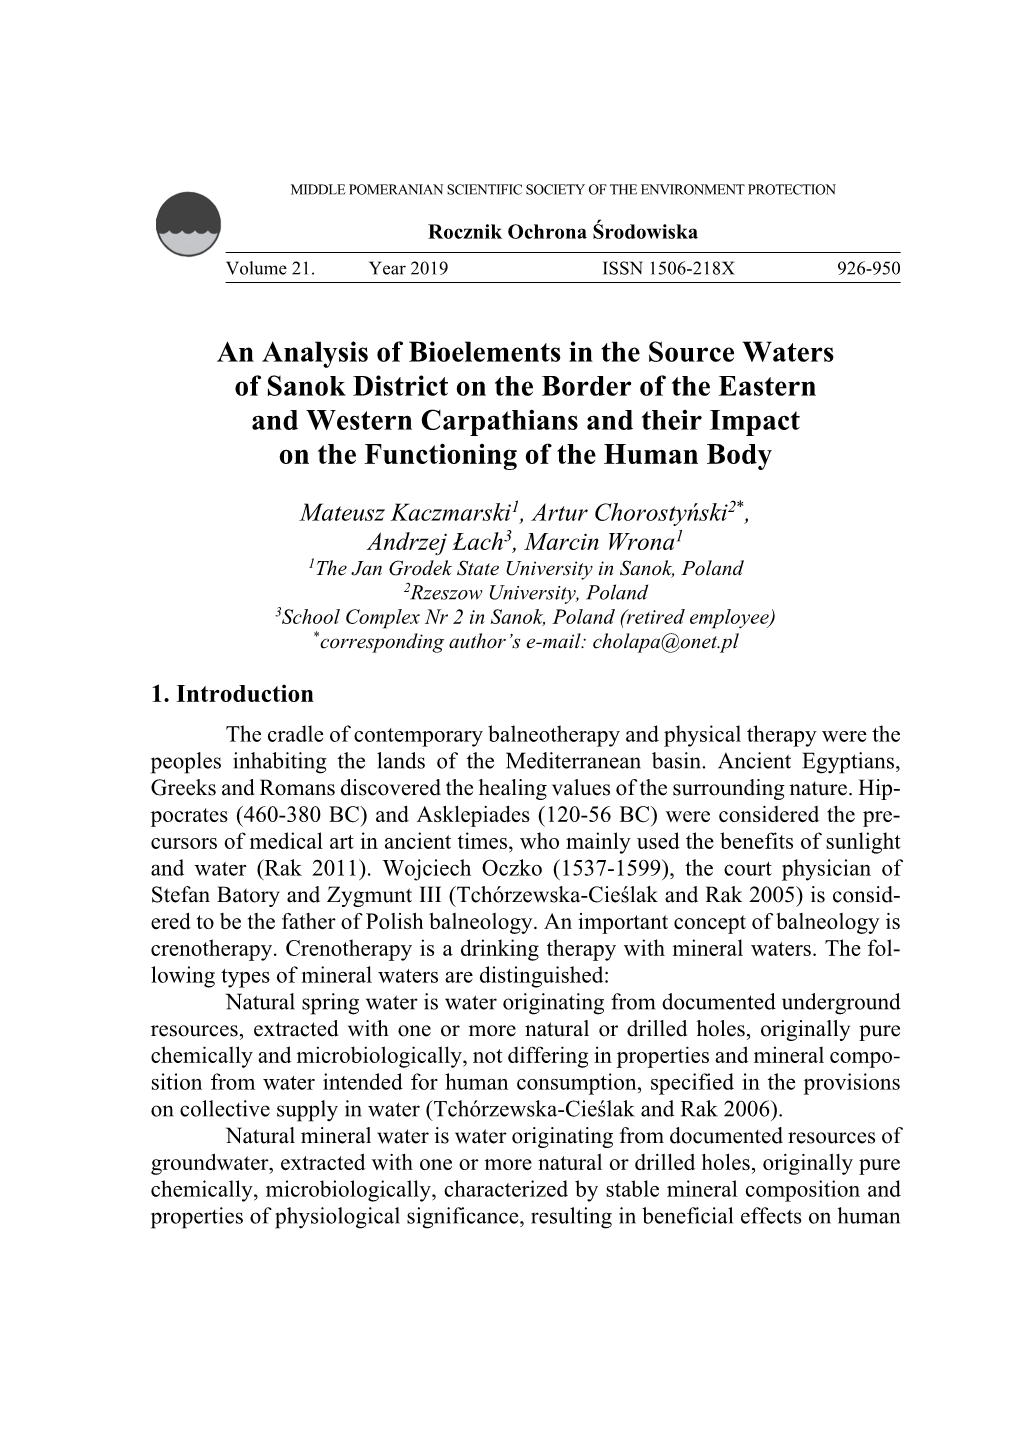 An Analysis of Bioelements in the Source Waters of Sanok District On